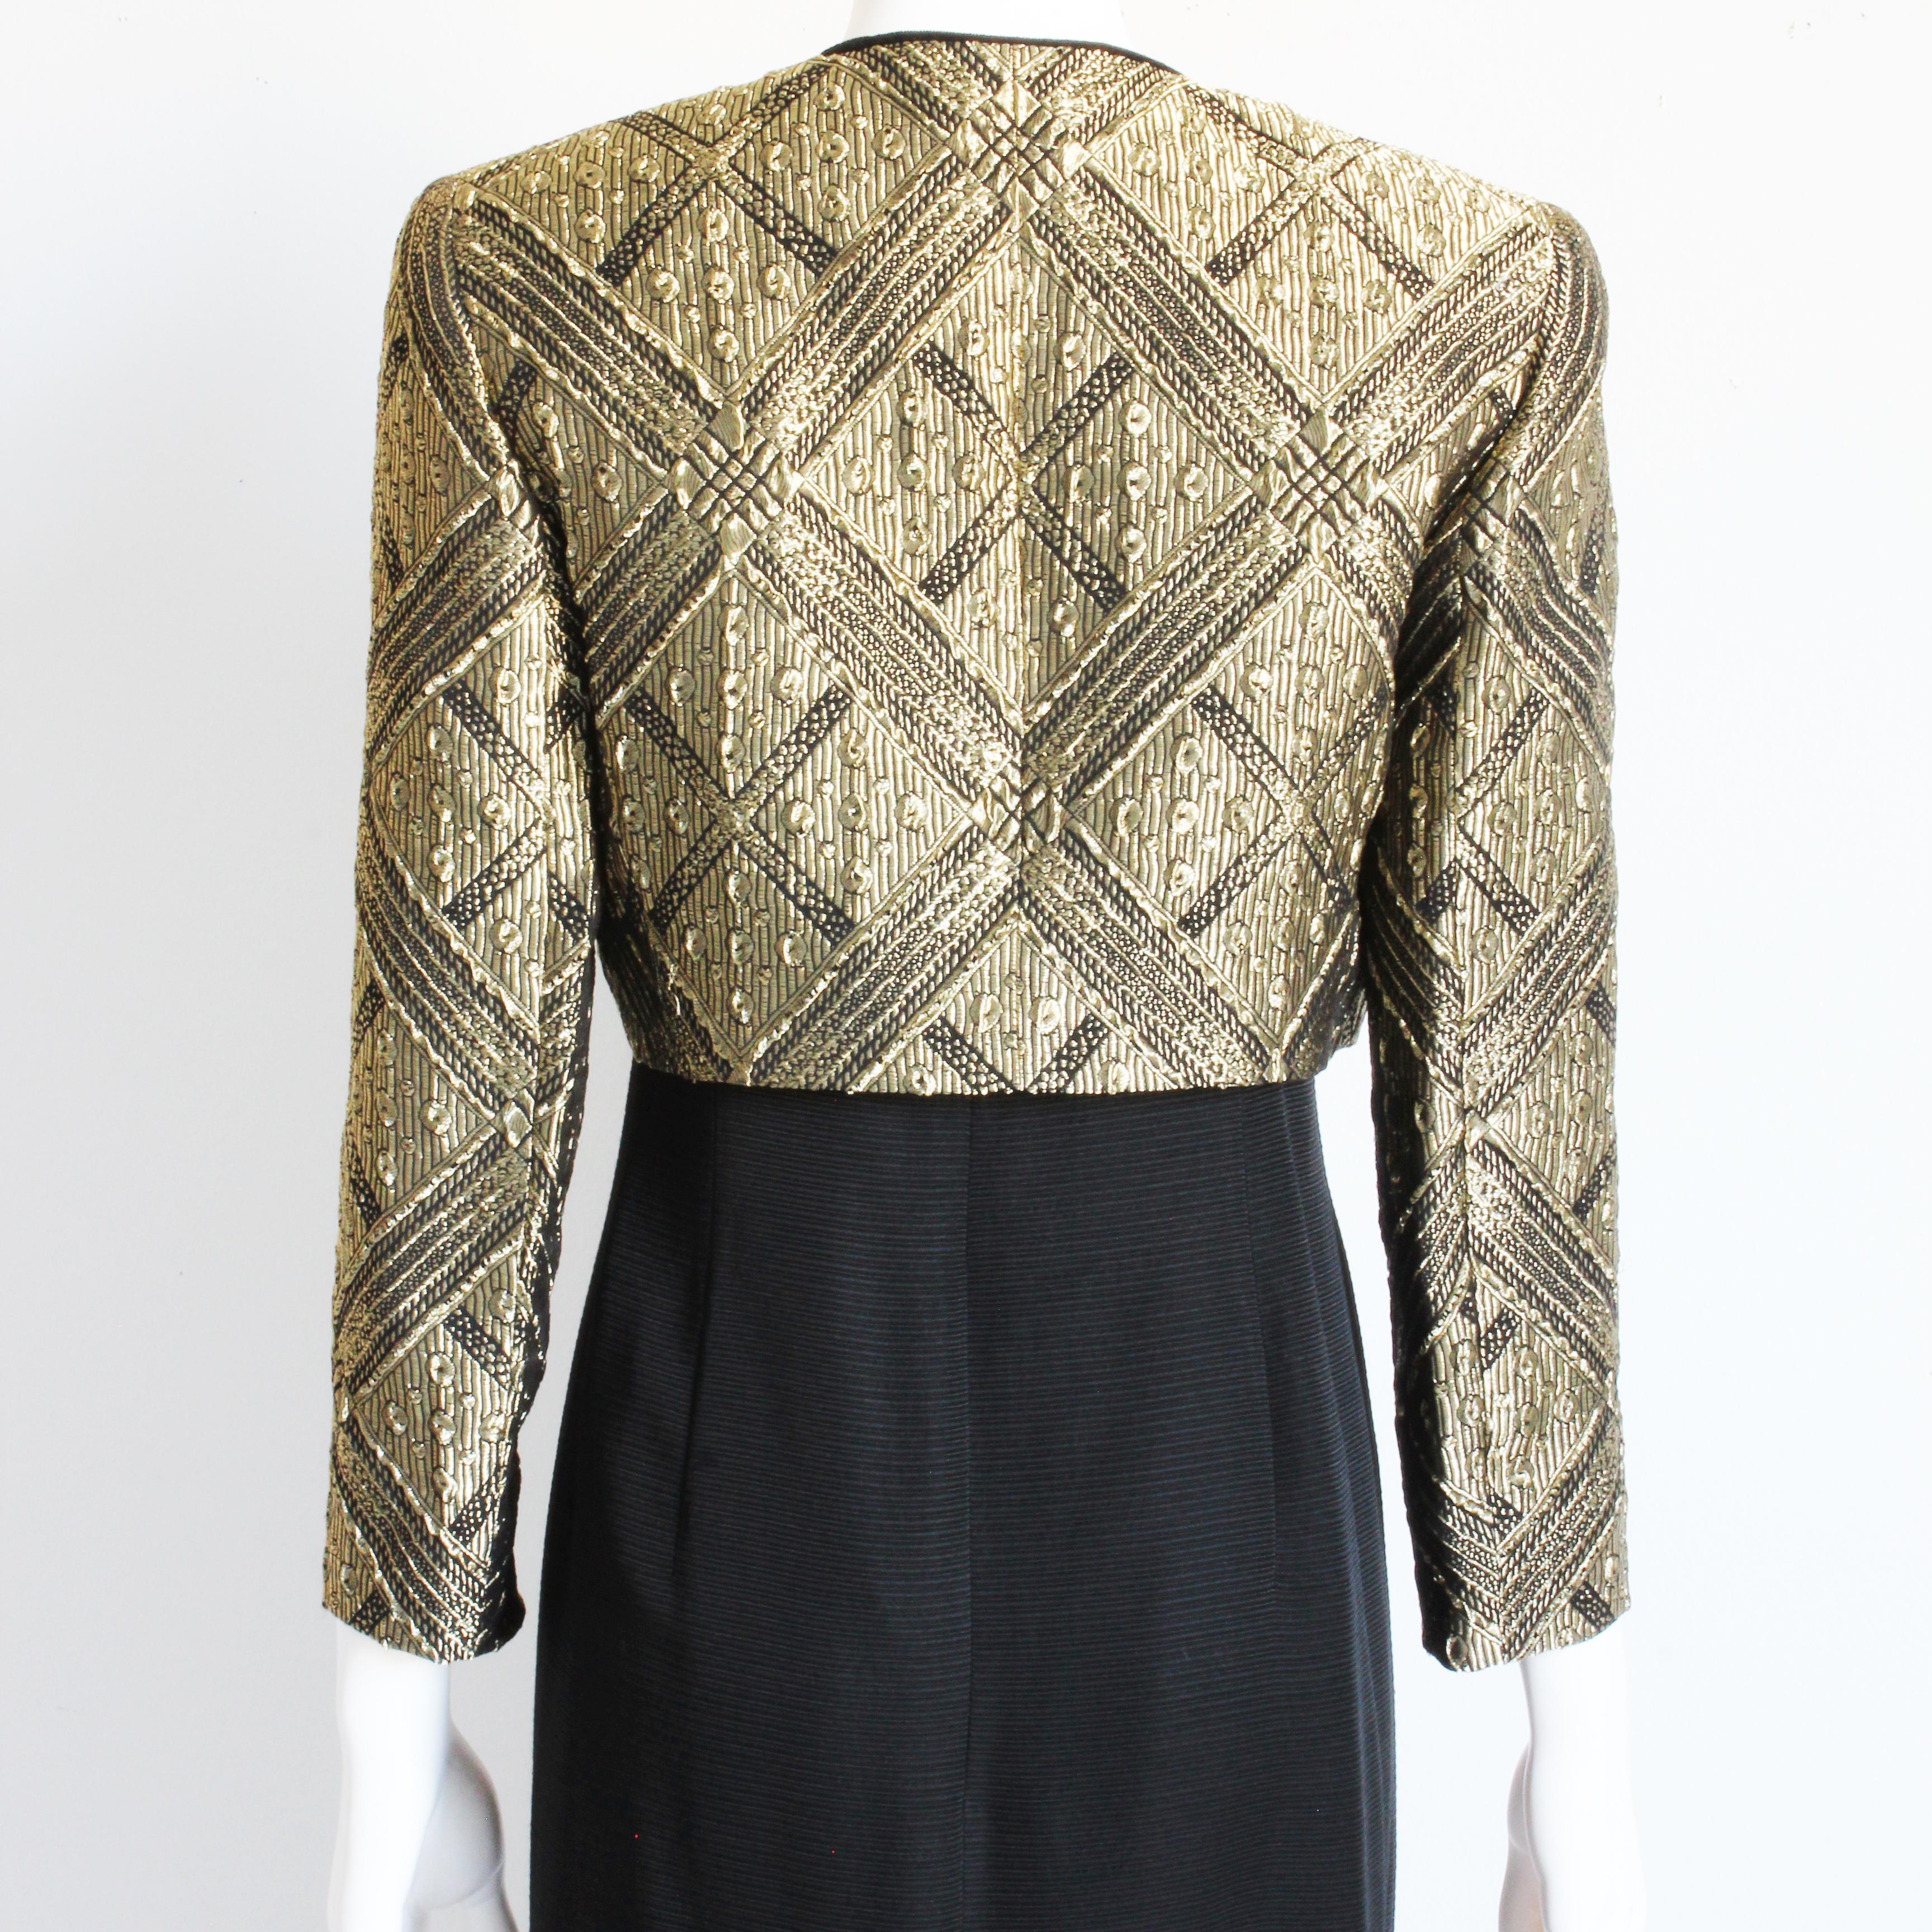 Louis Feraud Evening Gown and Jacket 2pc Long Gold Metallic Brocade Vintage 90s  For Sale 7